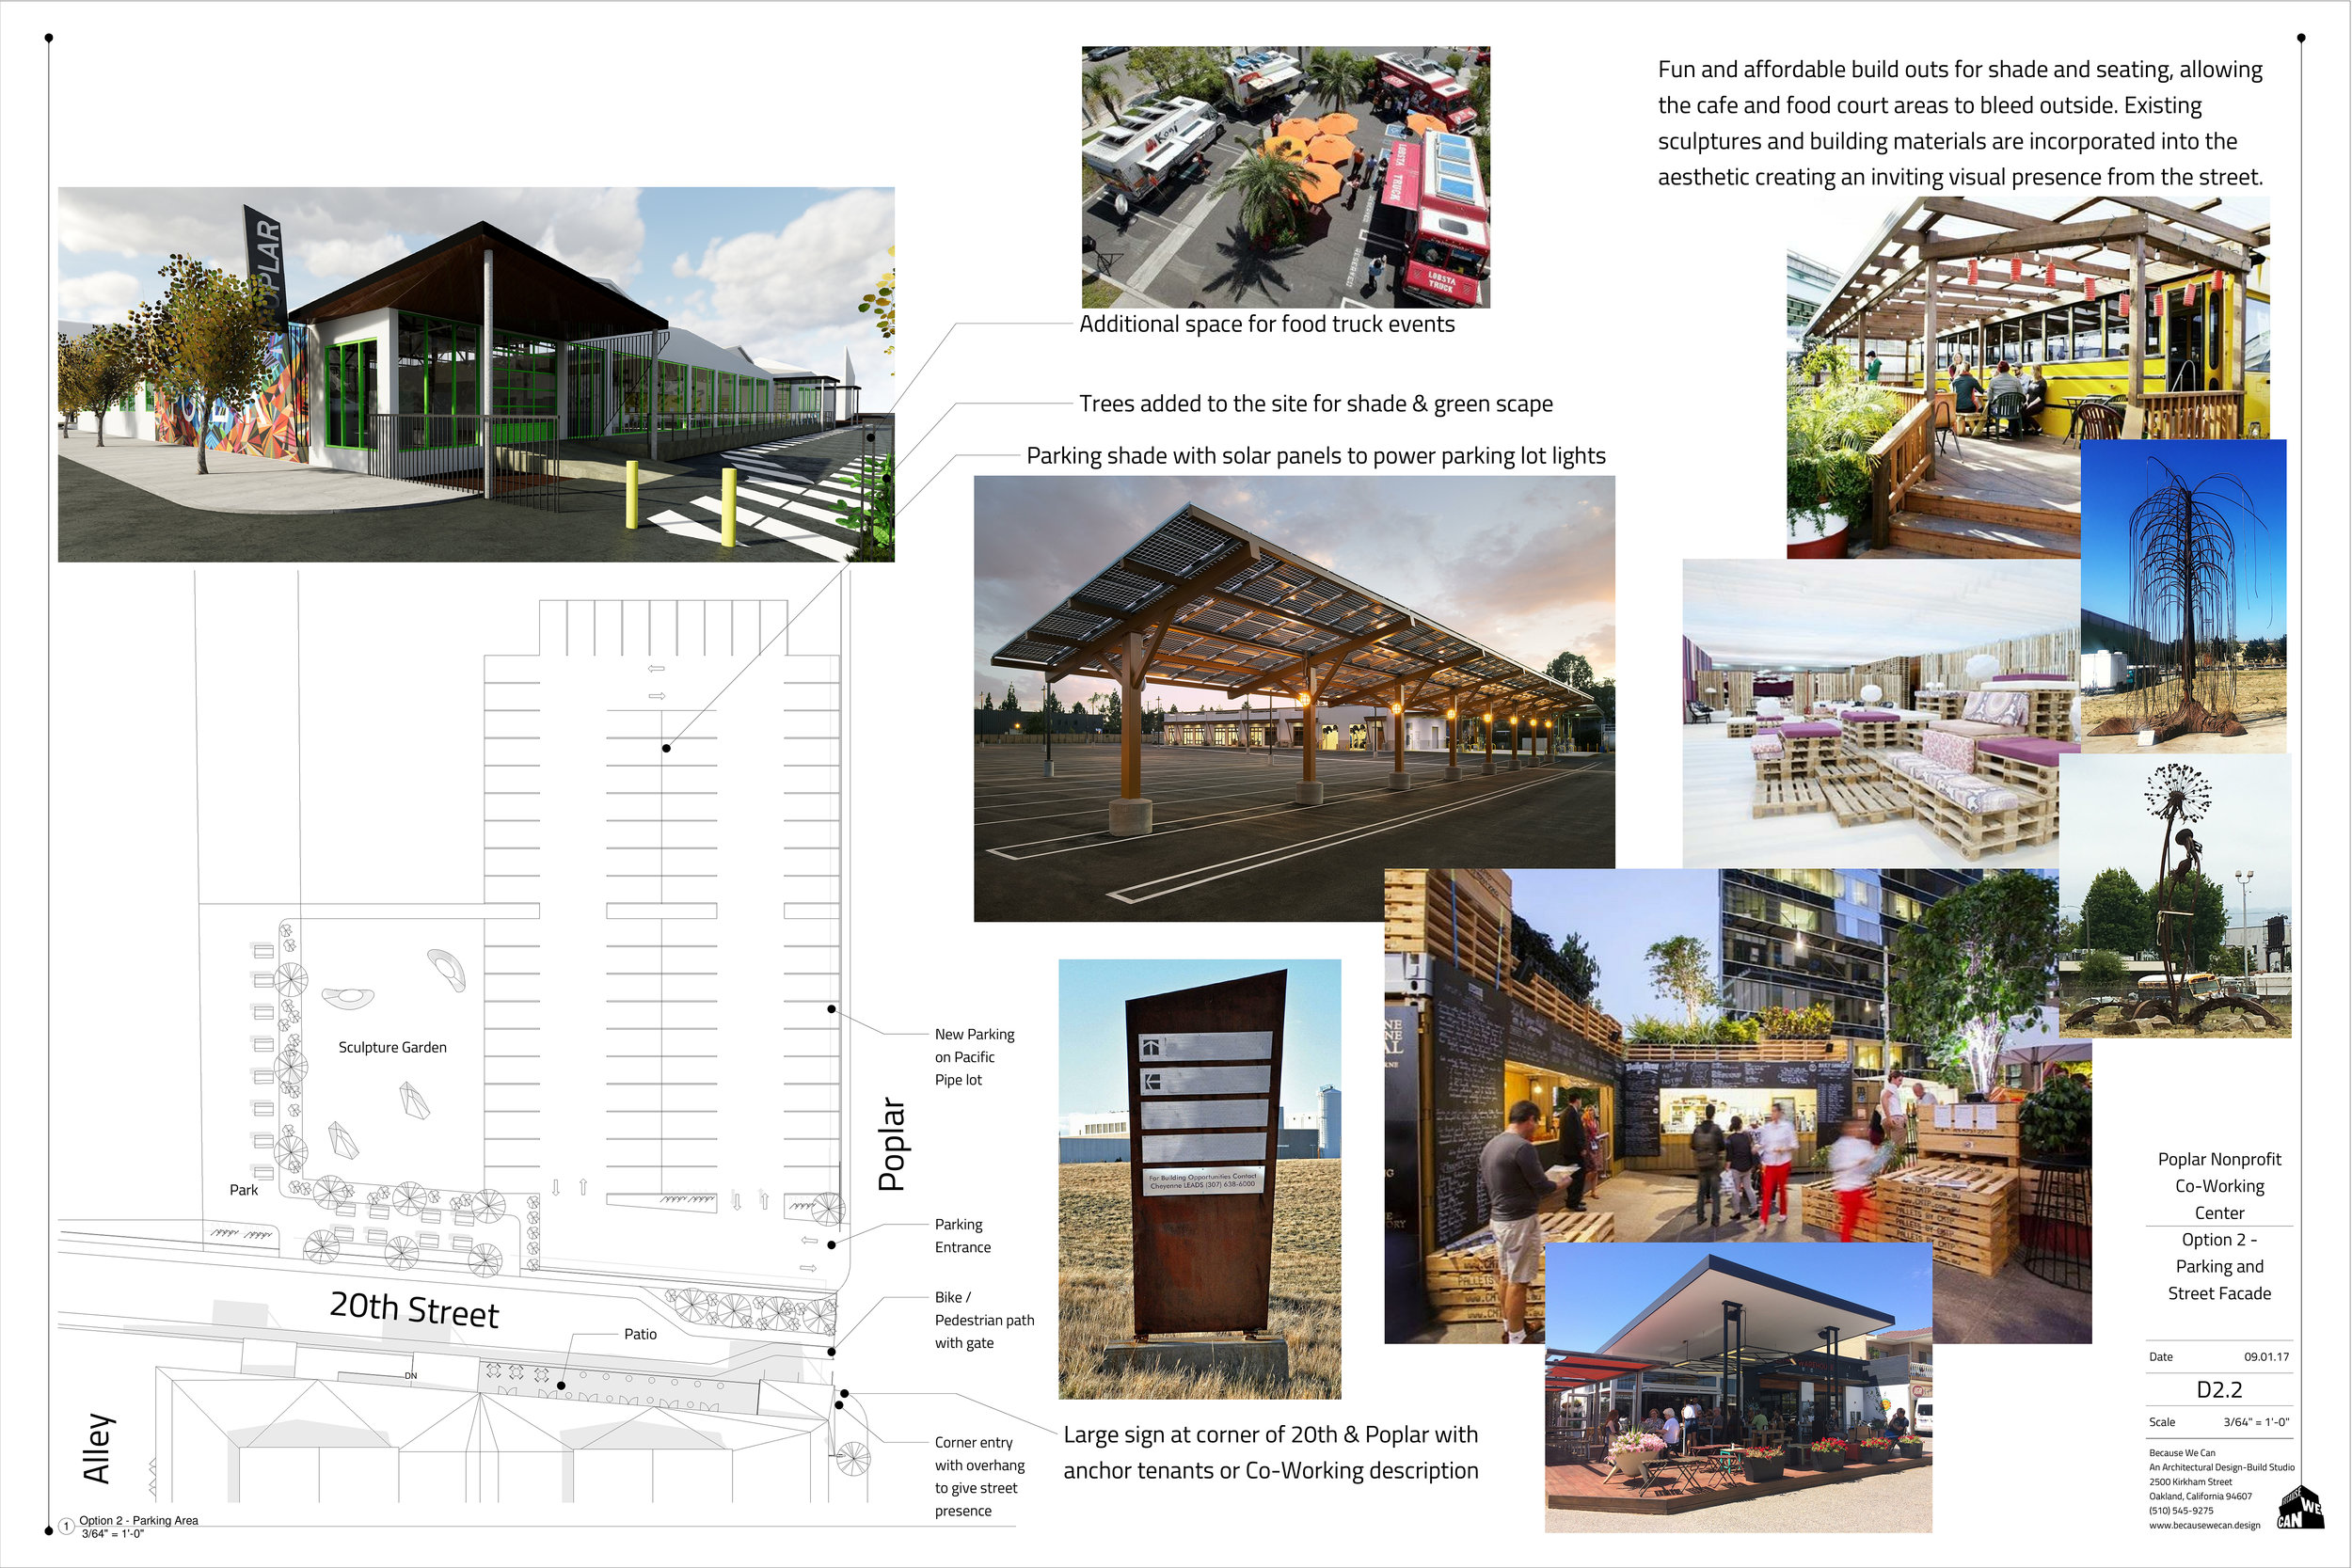  Using the warm West Oakland weather to our advantage in this exterior parking and garden plan: there are solar powered parking awnings, fun shaded outside seating areas and cool signage that matches the aesthetic of the surrounding sculptures in the